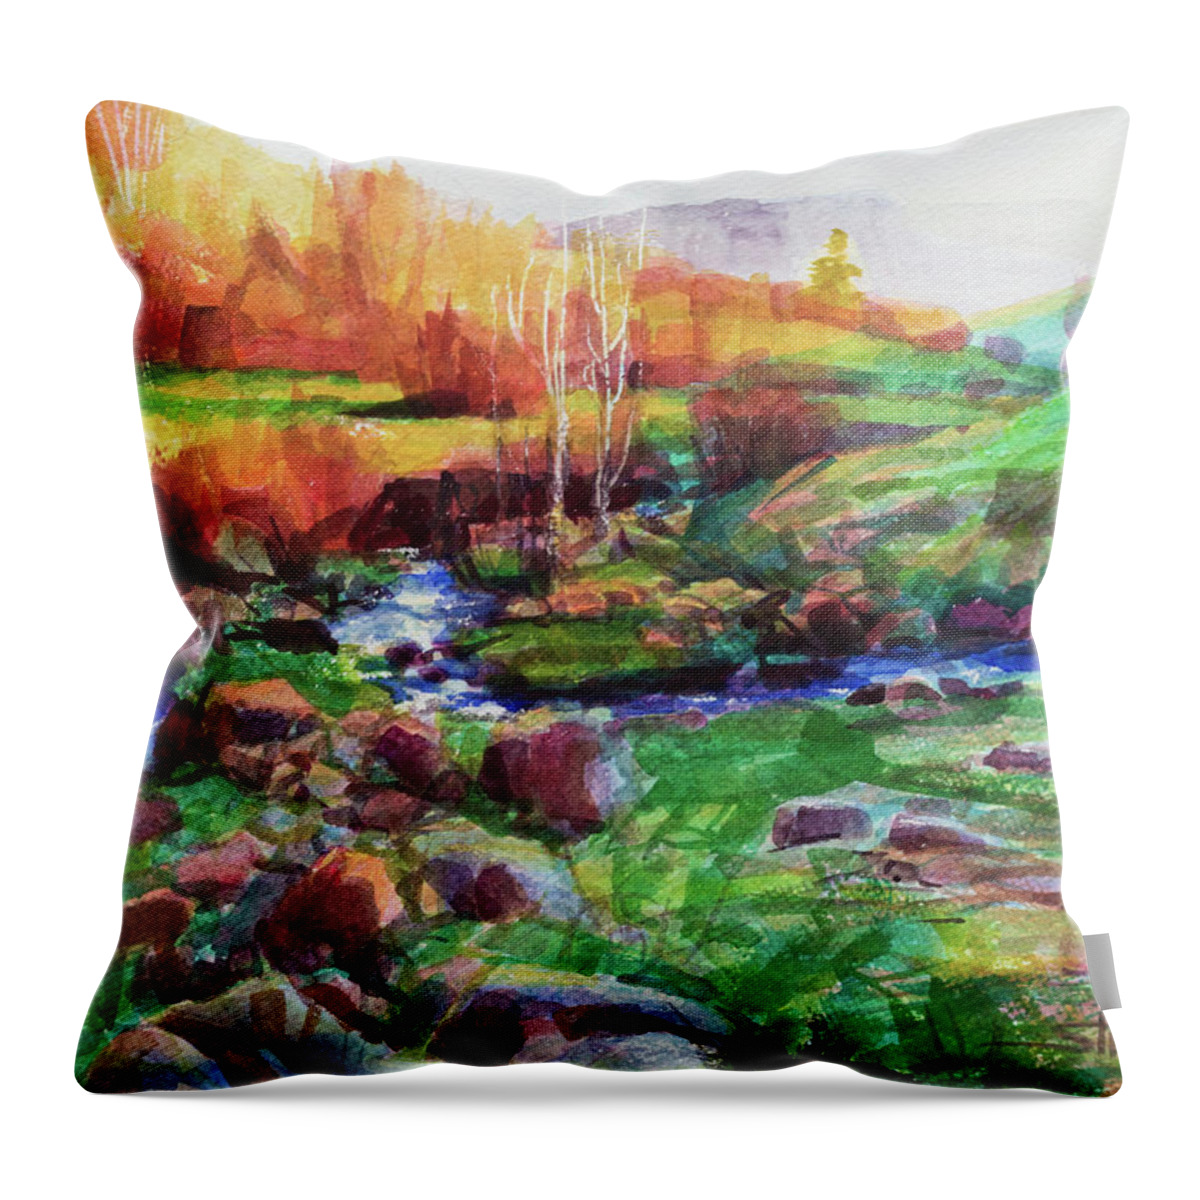 Landscape Throw Pillow featuring the painting Gilded Hillside by Steve Henderson